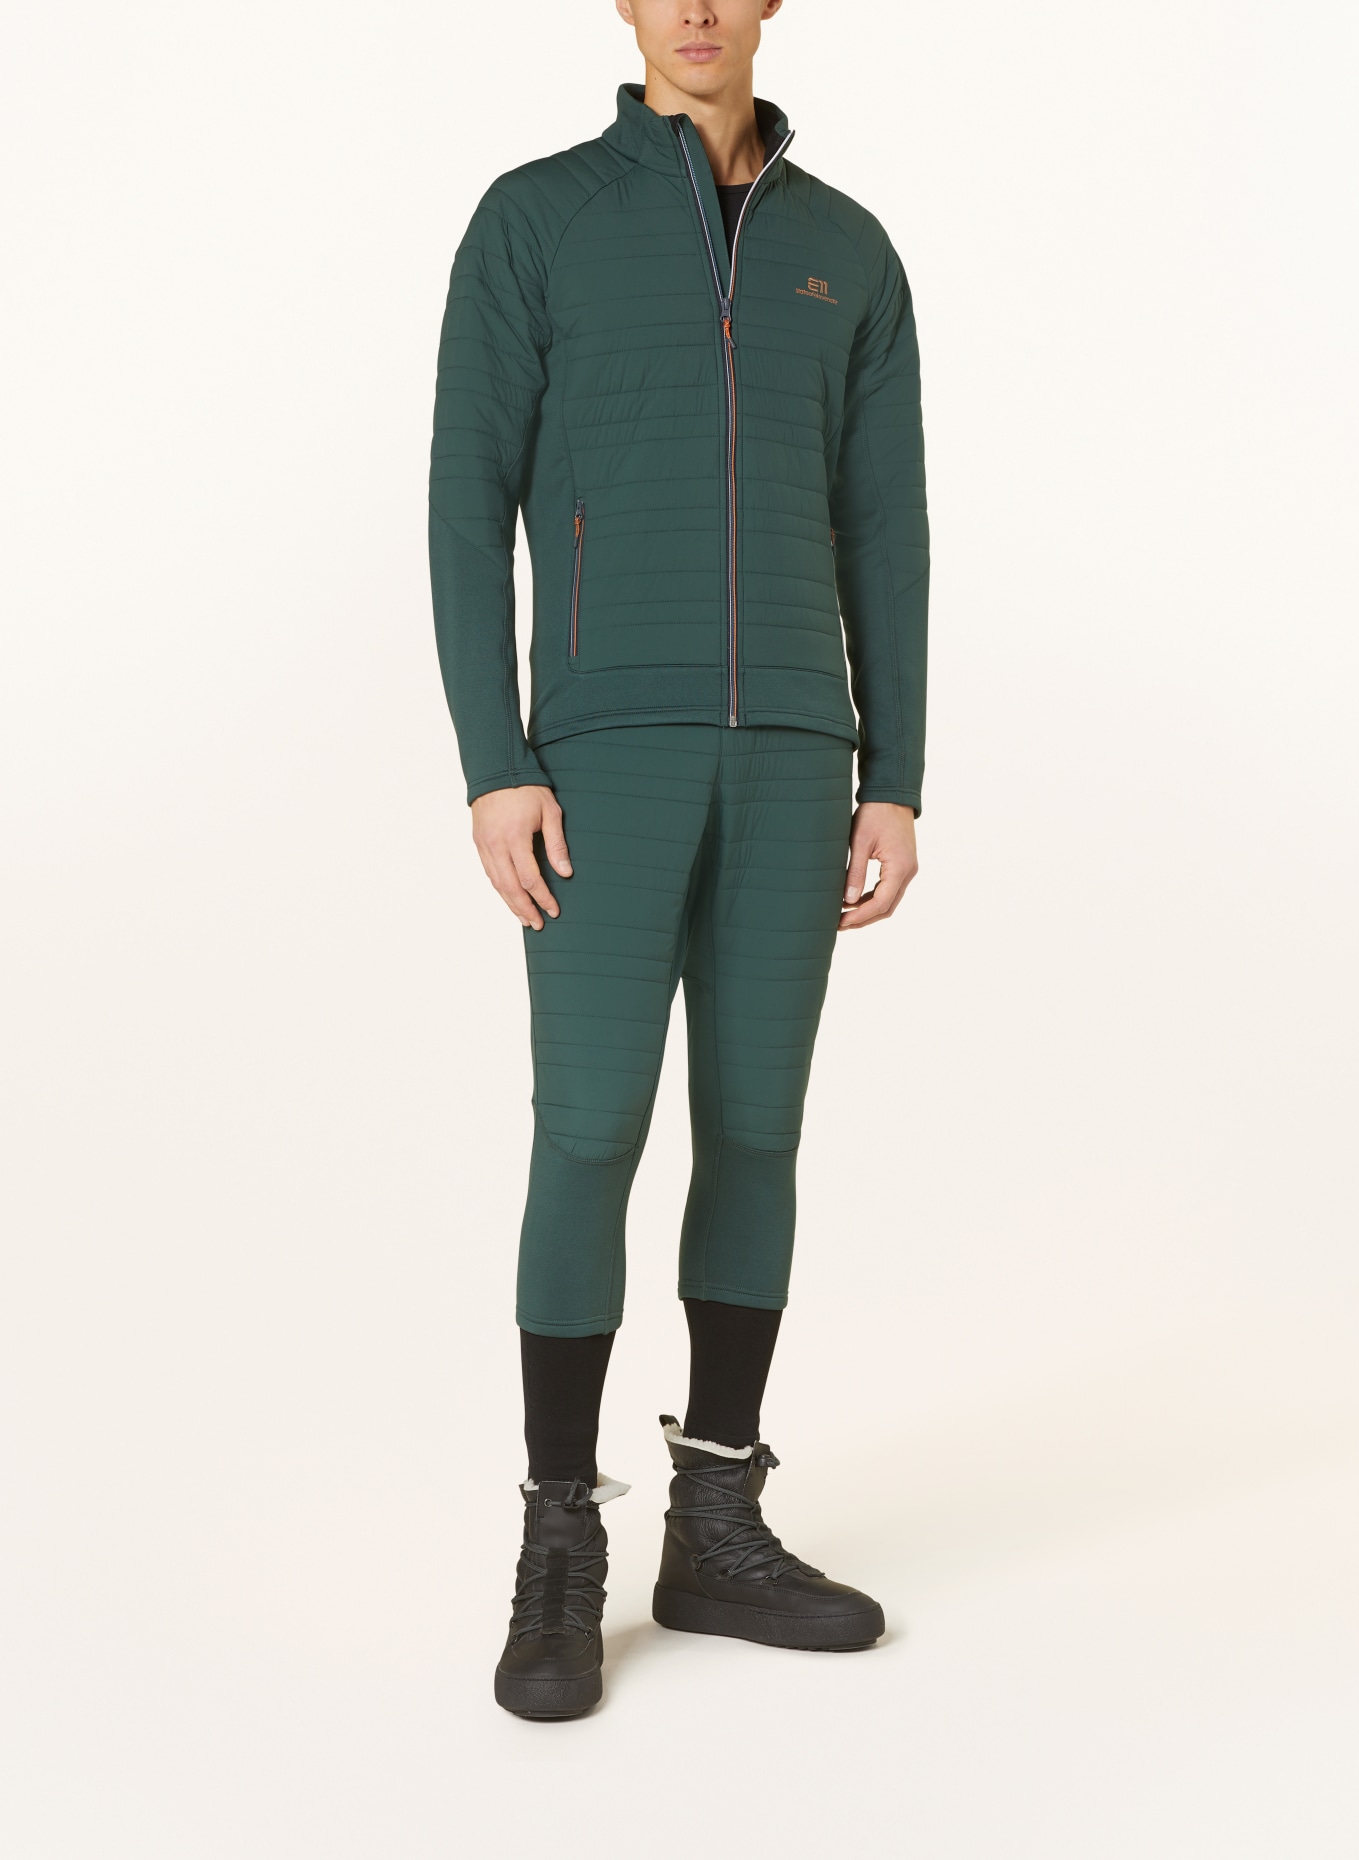 state of elevenate Mid-layer jacket FUSION STRETCH, Color: DARK GREEN (Image 2)